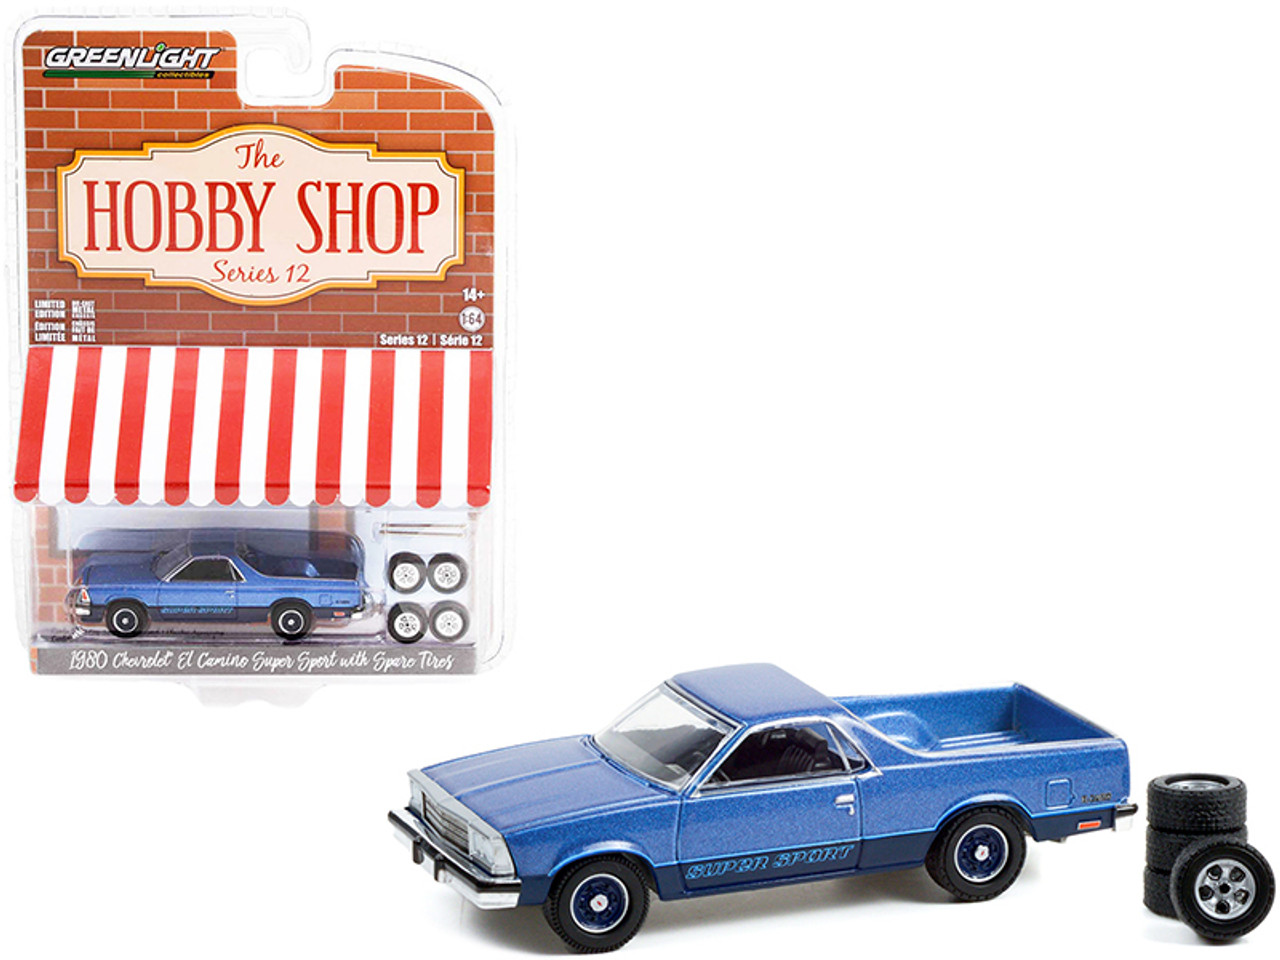 1980 Chevrolet El Camino Super Sport Blue Metallic and Spare Tires "The Hobby Shop" Series 12 1/64 Diecast Model Car by Greenlight